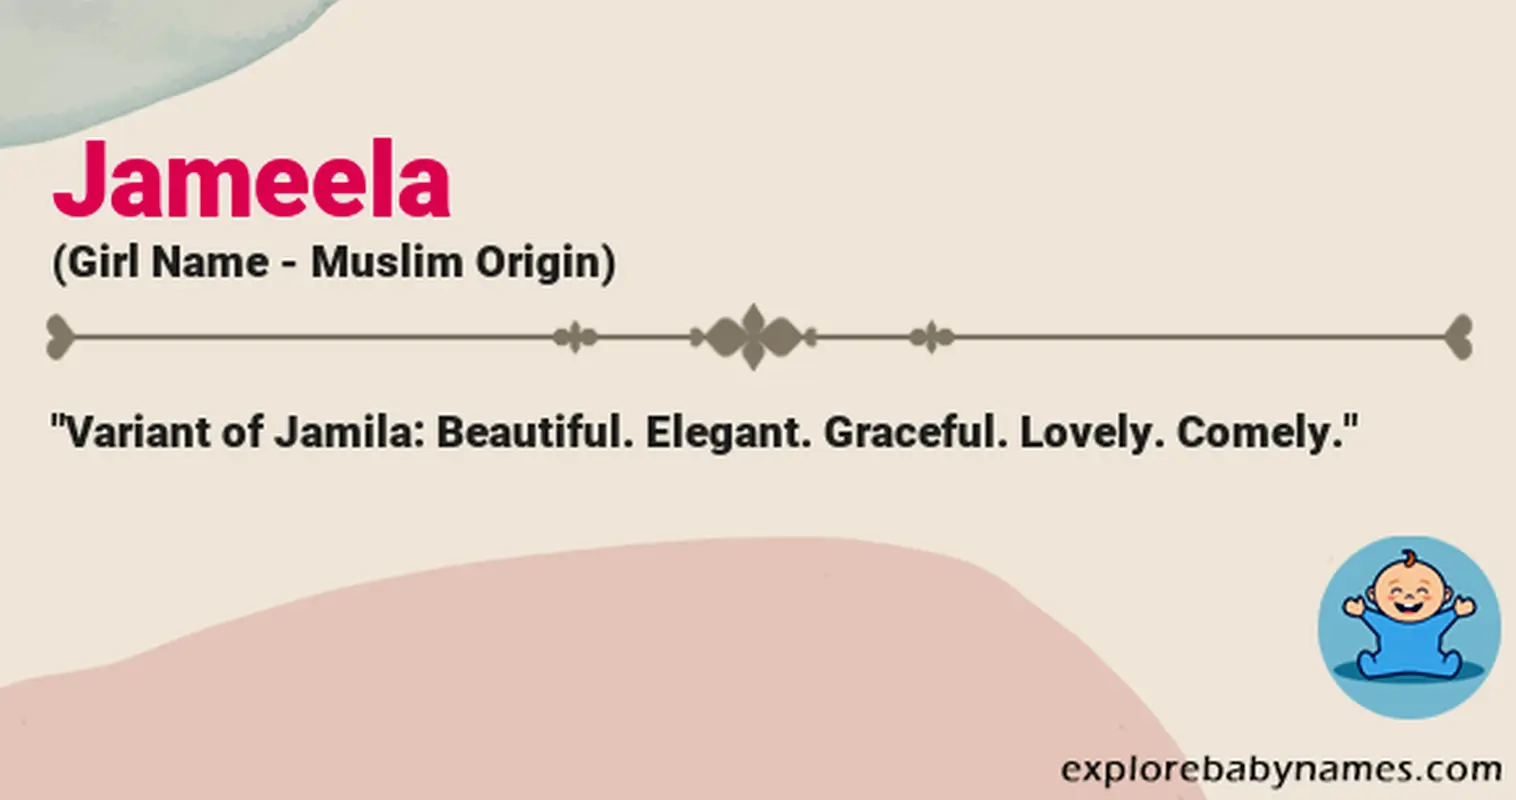 Meaning of Jameela